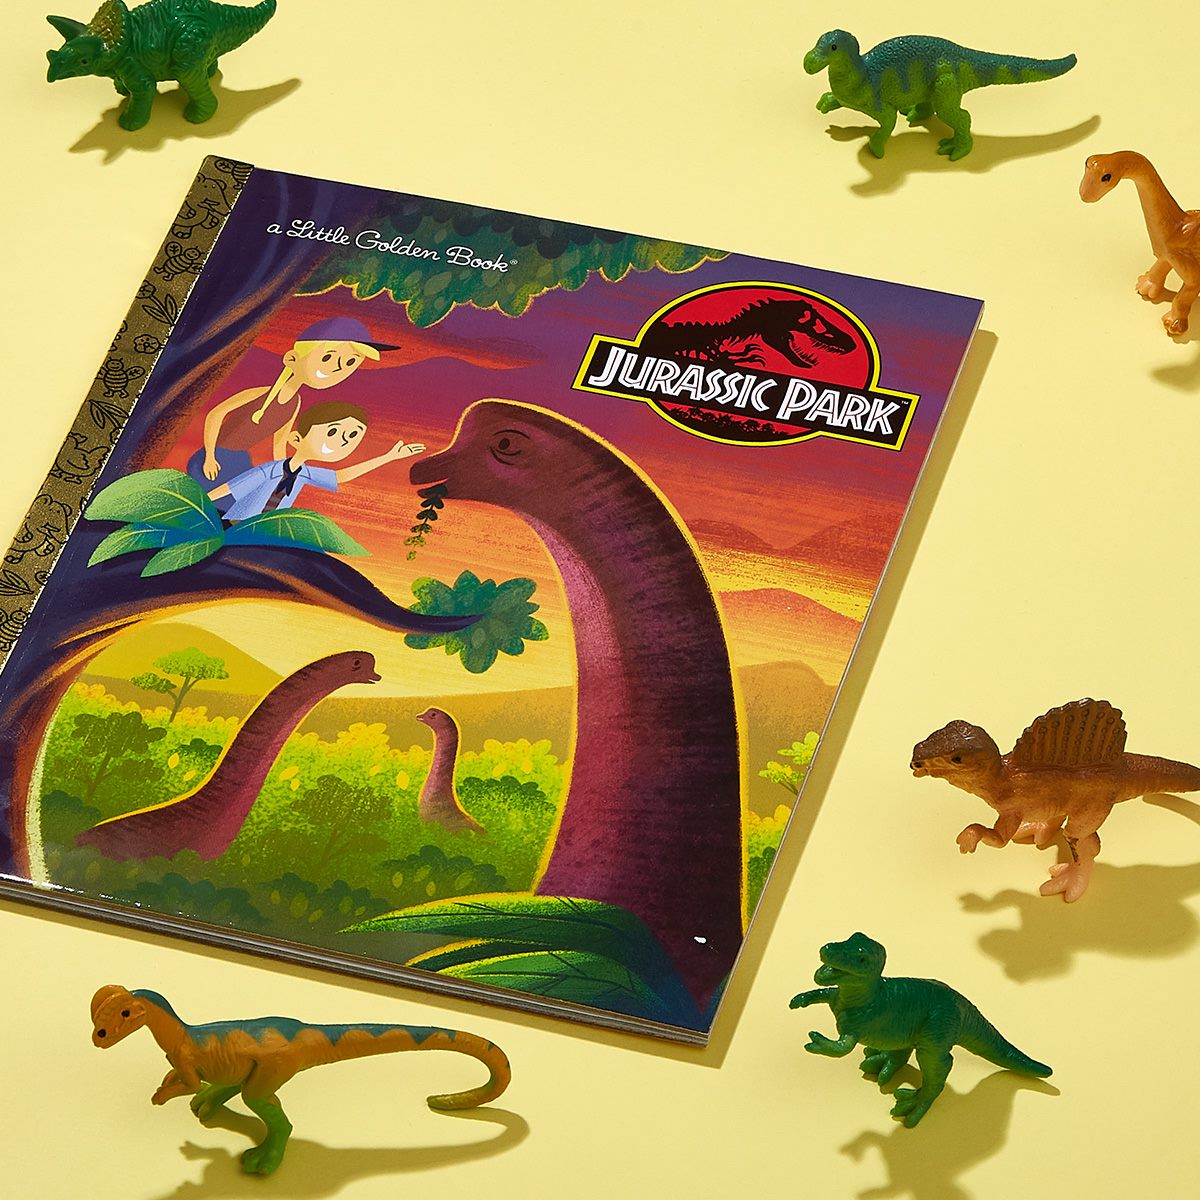 Jurassic Park made for young kids » MiscRave